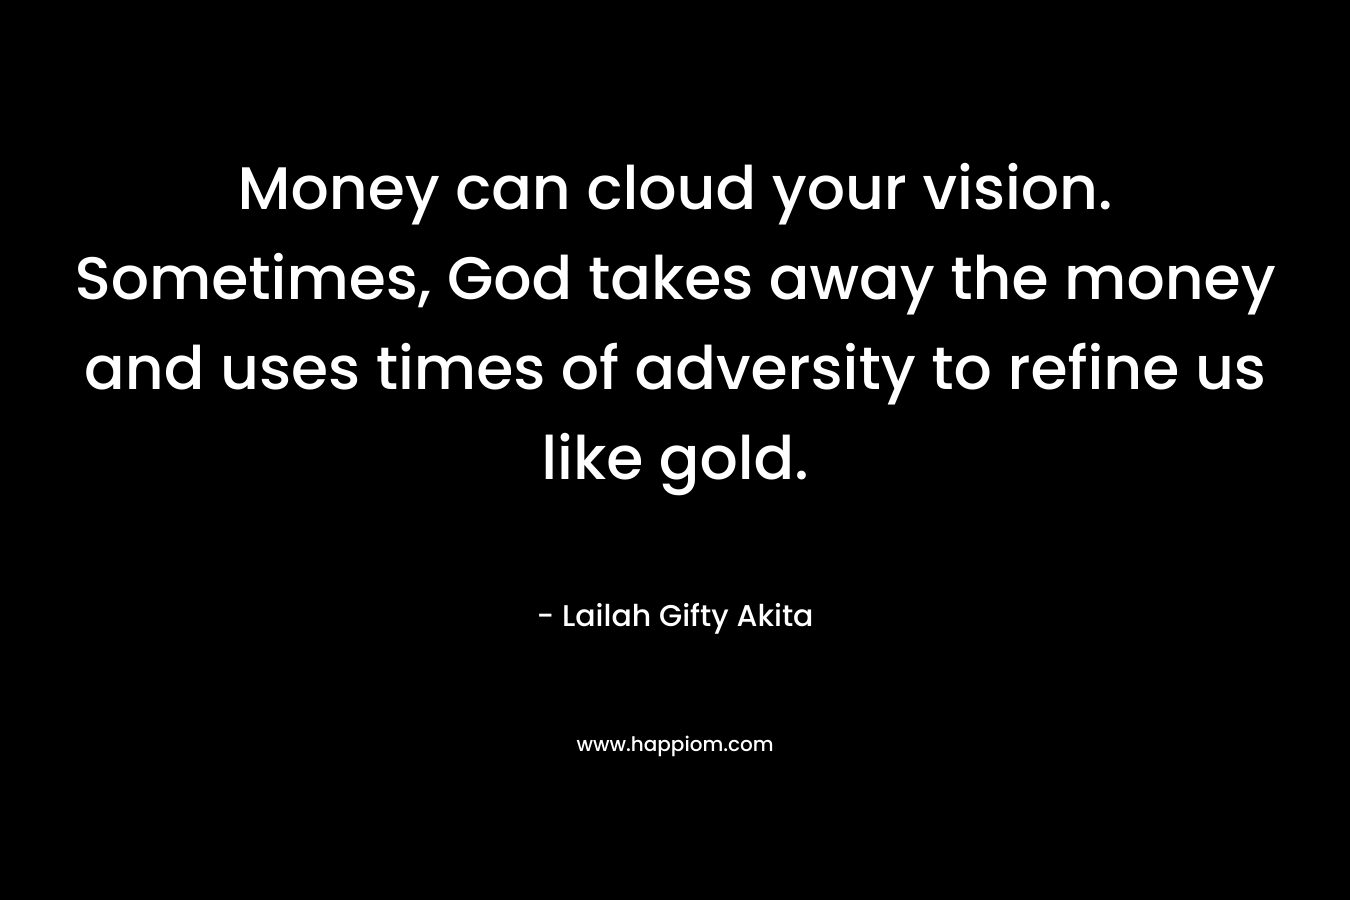 Money can cloud your vision. Sometimes, God takes away the money and uses times of adversity to refine us like gold.